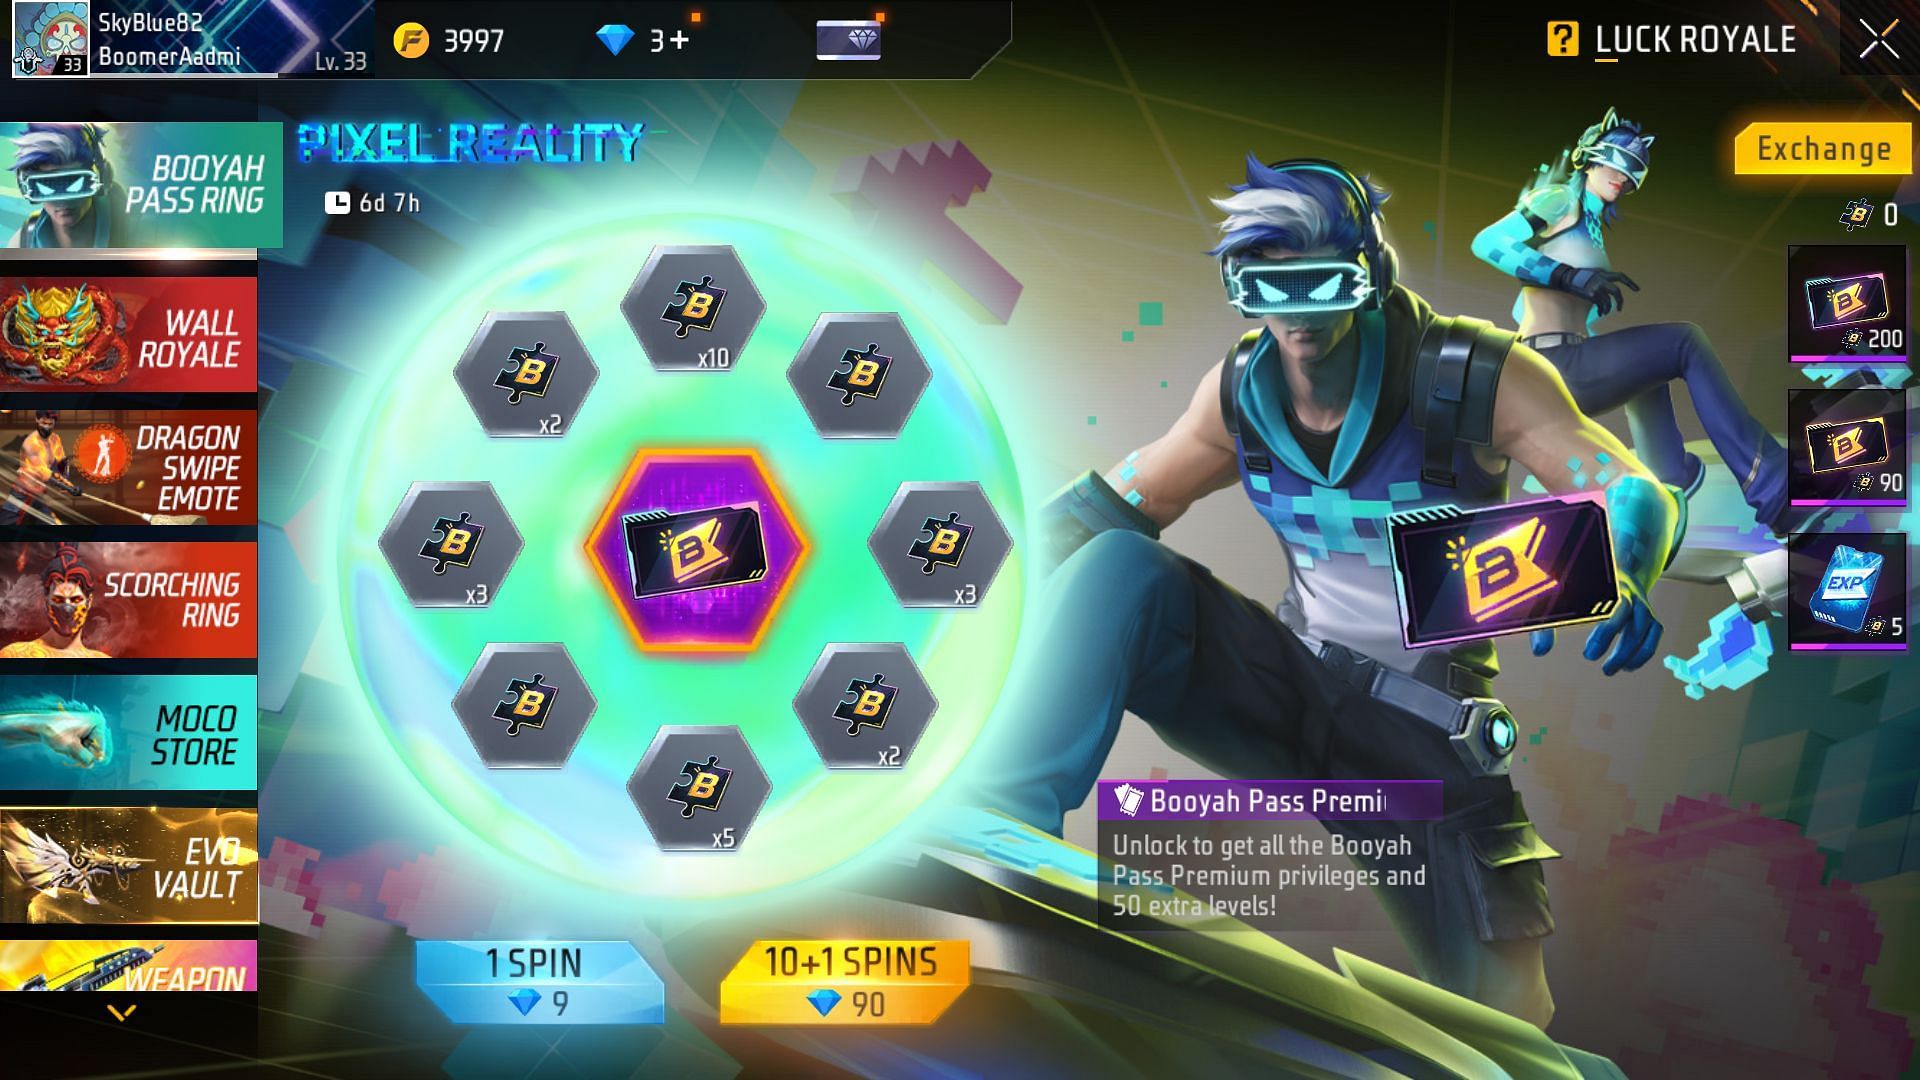 Spend diamonds and make spins in the Free Fire Booyah Pass Ring (Image via Garena)